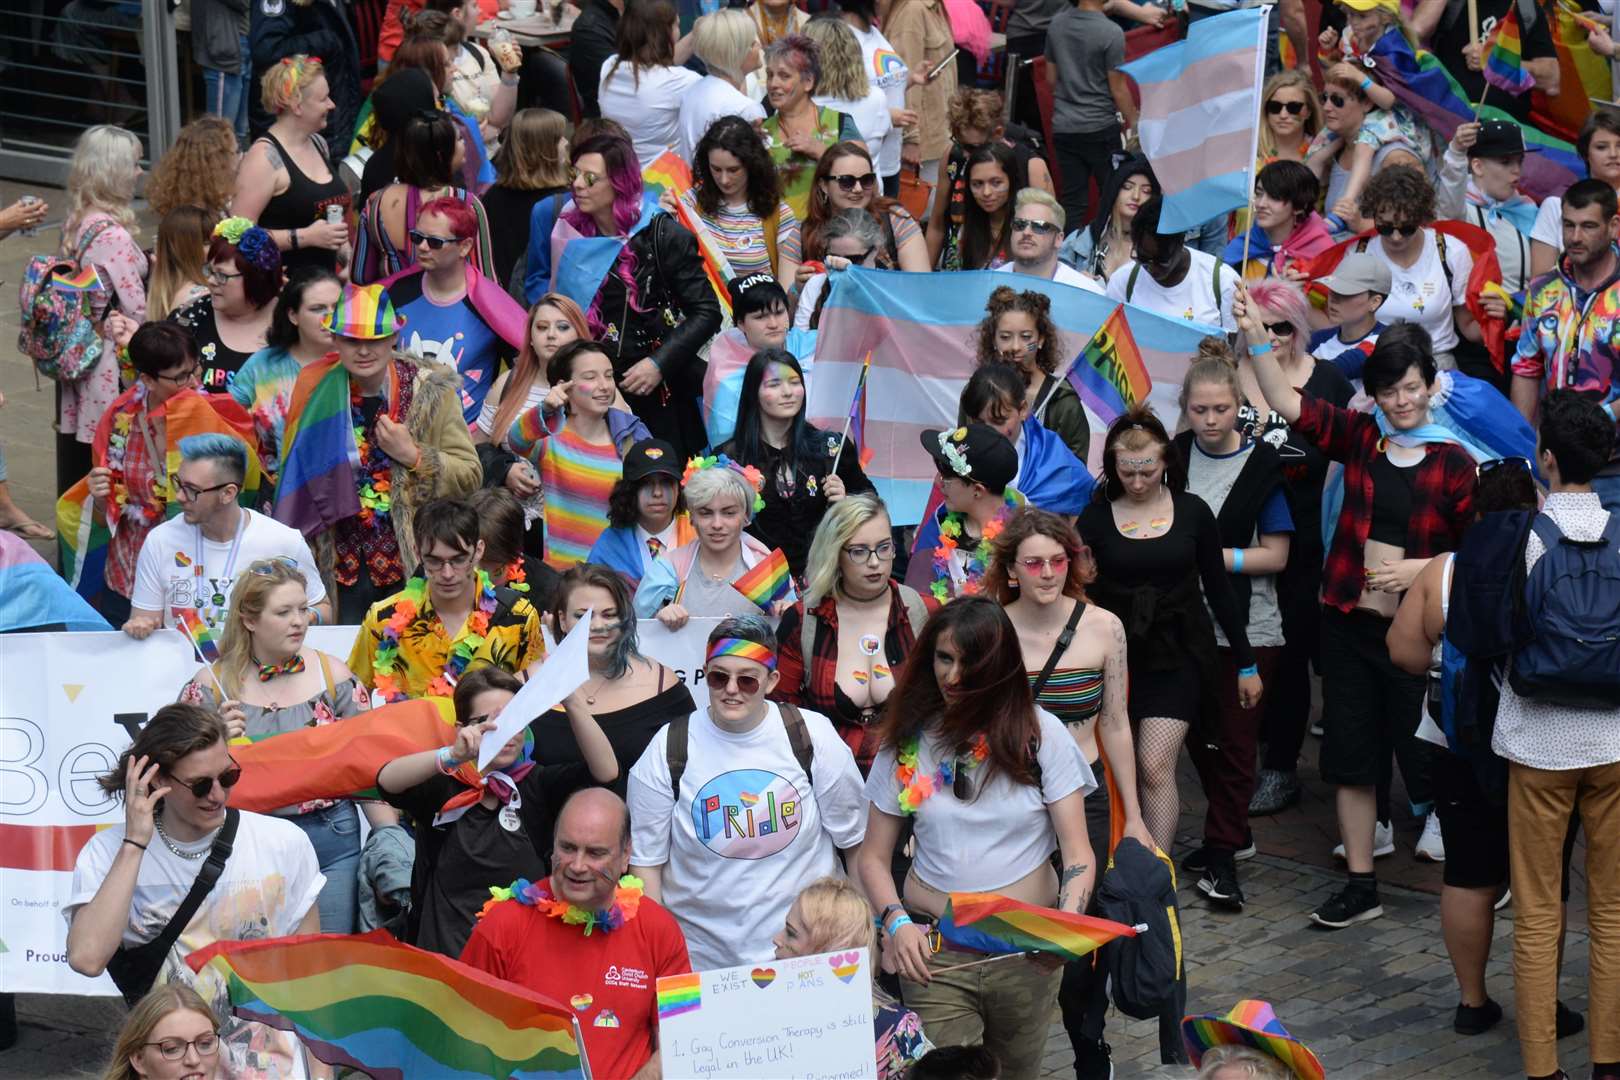 The Pride parade making its way through the city. Picture: Chris Davey.